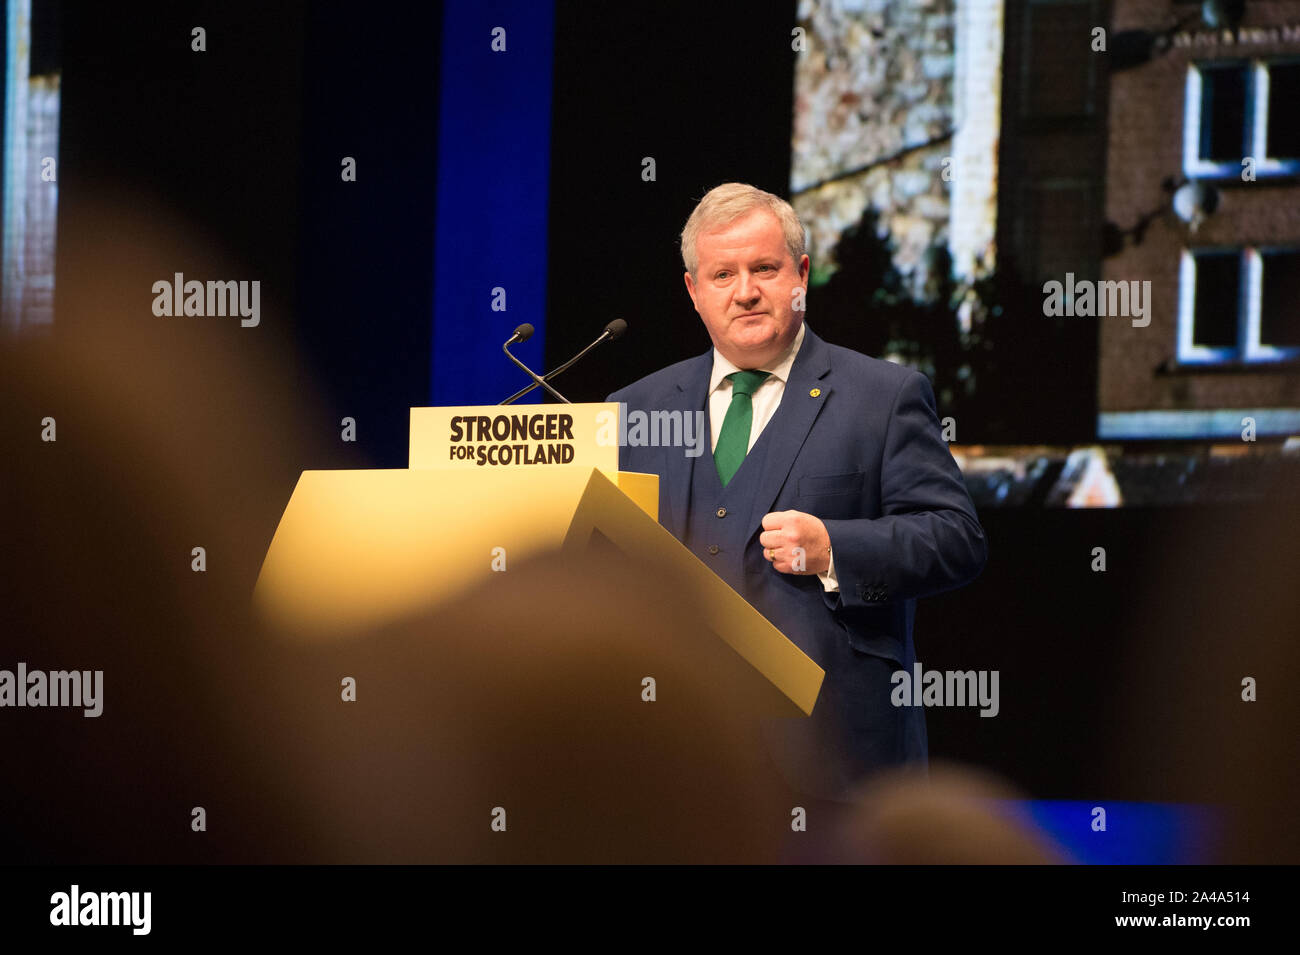 Aberdeen, UK. 13 October 2019.  Pictured: Ian Blackford MP - Westminster Leader for the Scottish National Party (SNP).  Scottish National Party (SNP) Conference at the Aberdeen Exhibition Conference Centre (AECC). Credit: Colin Fisher/Alamy Live News Stock Photo